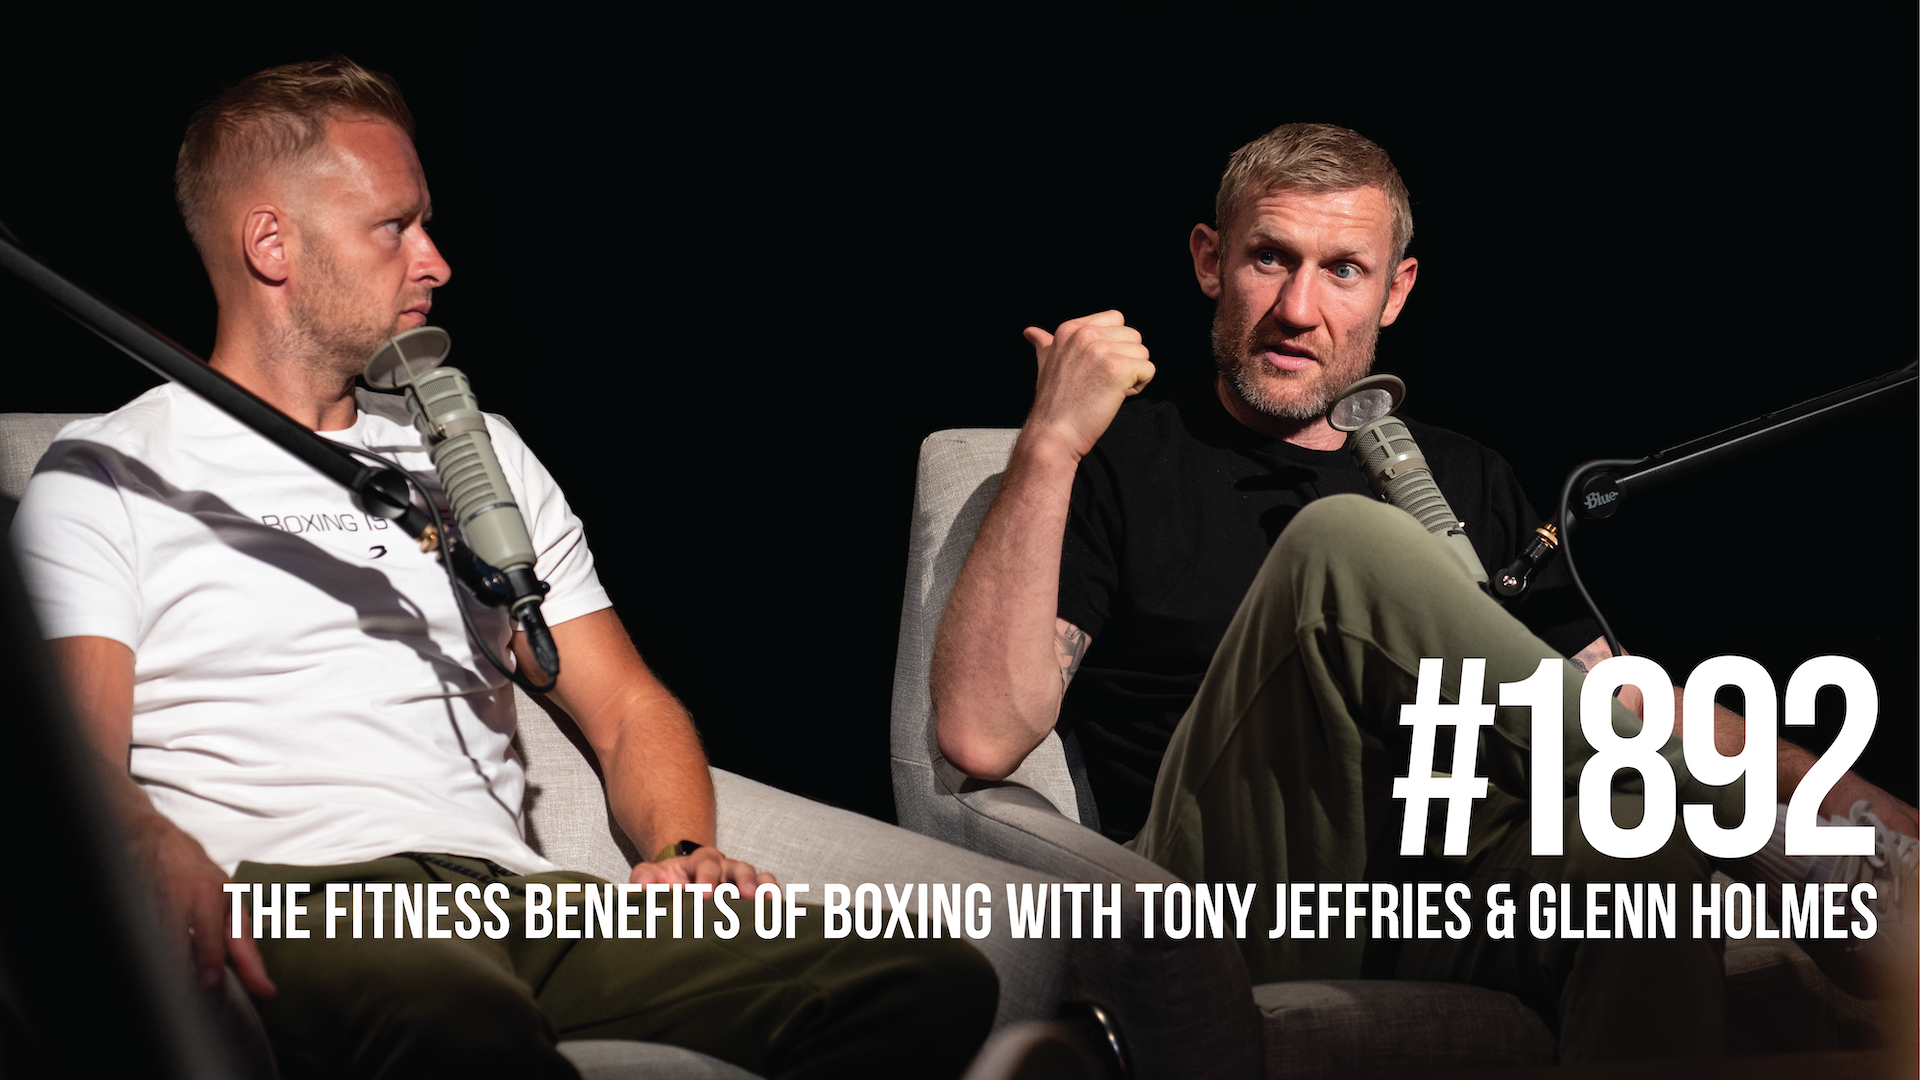 1892: The Fitness Benefits of Boxing With Tony Jeffries & Glenn Holmes